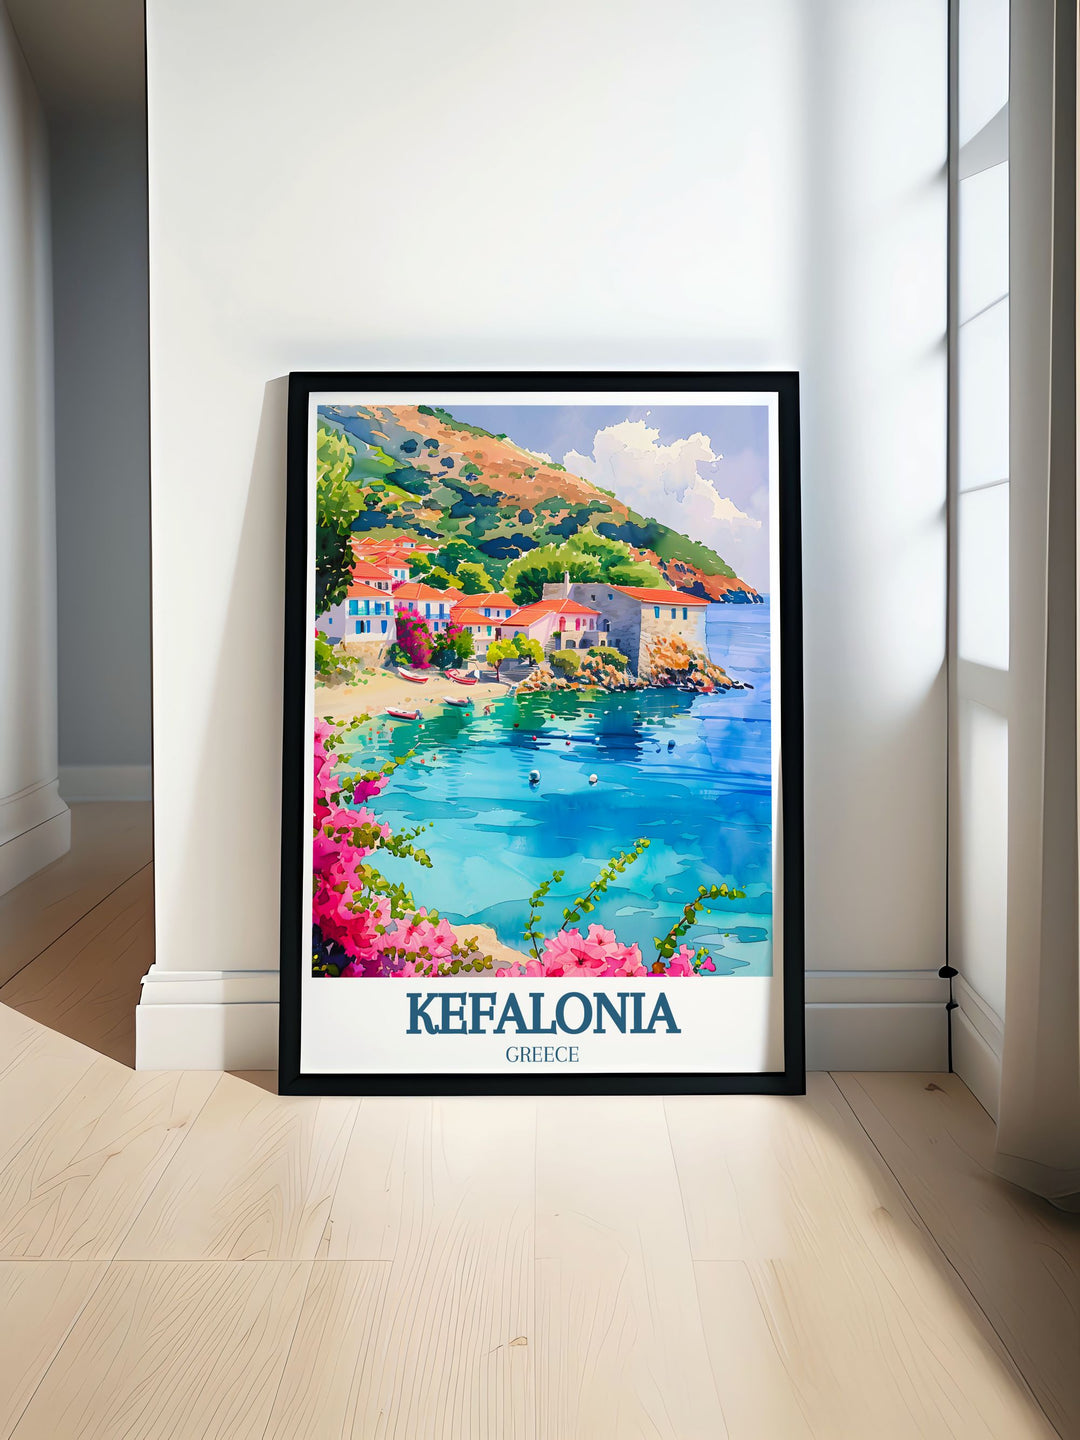 An elegant art print featuring Assos Village, emphasizing its tranquil beauty and historical relevance. The colorful illustration brings the villages unique landscapes and serene environment to life.